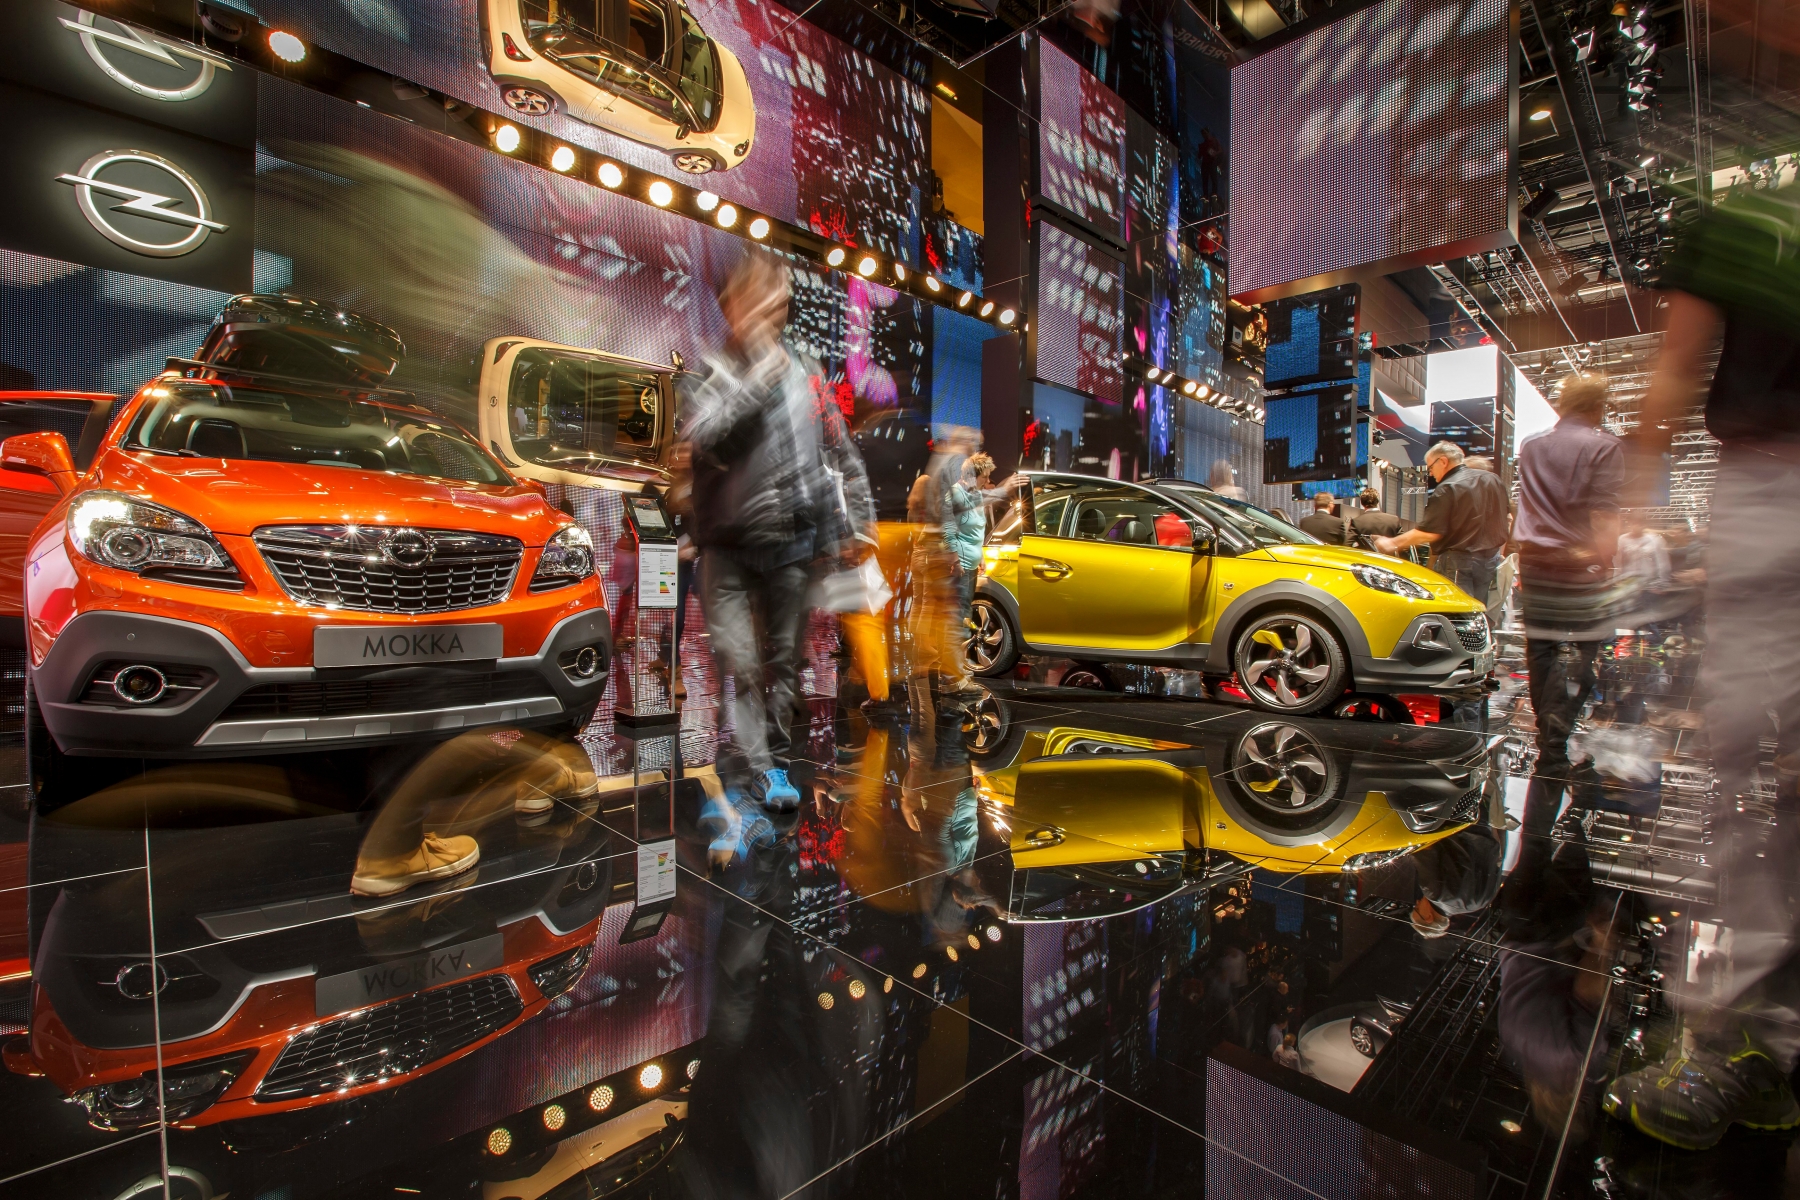 Visitors gather at the Opel booth during the first weekend the 84th Geneva International Motor Show, during the first weekend , in Geneva, Switzerland, Sunday, March 9, 2014. The Motor Show will open its gates to the public from 6th to 16th March presenting more than 250 exhibitors and more than 146 world and European premieres. (KEYSTONE/Salvatore Di Nolfi) SWITZERLAND MOTOR SHOW